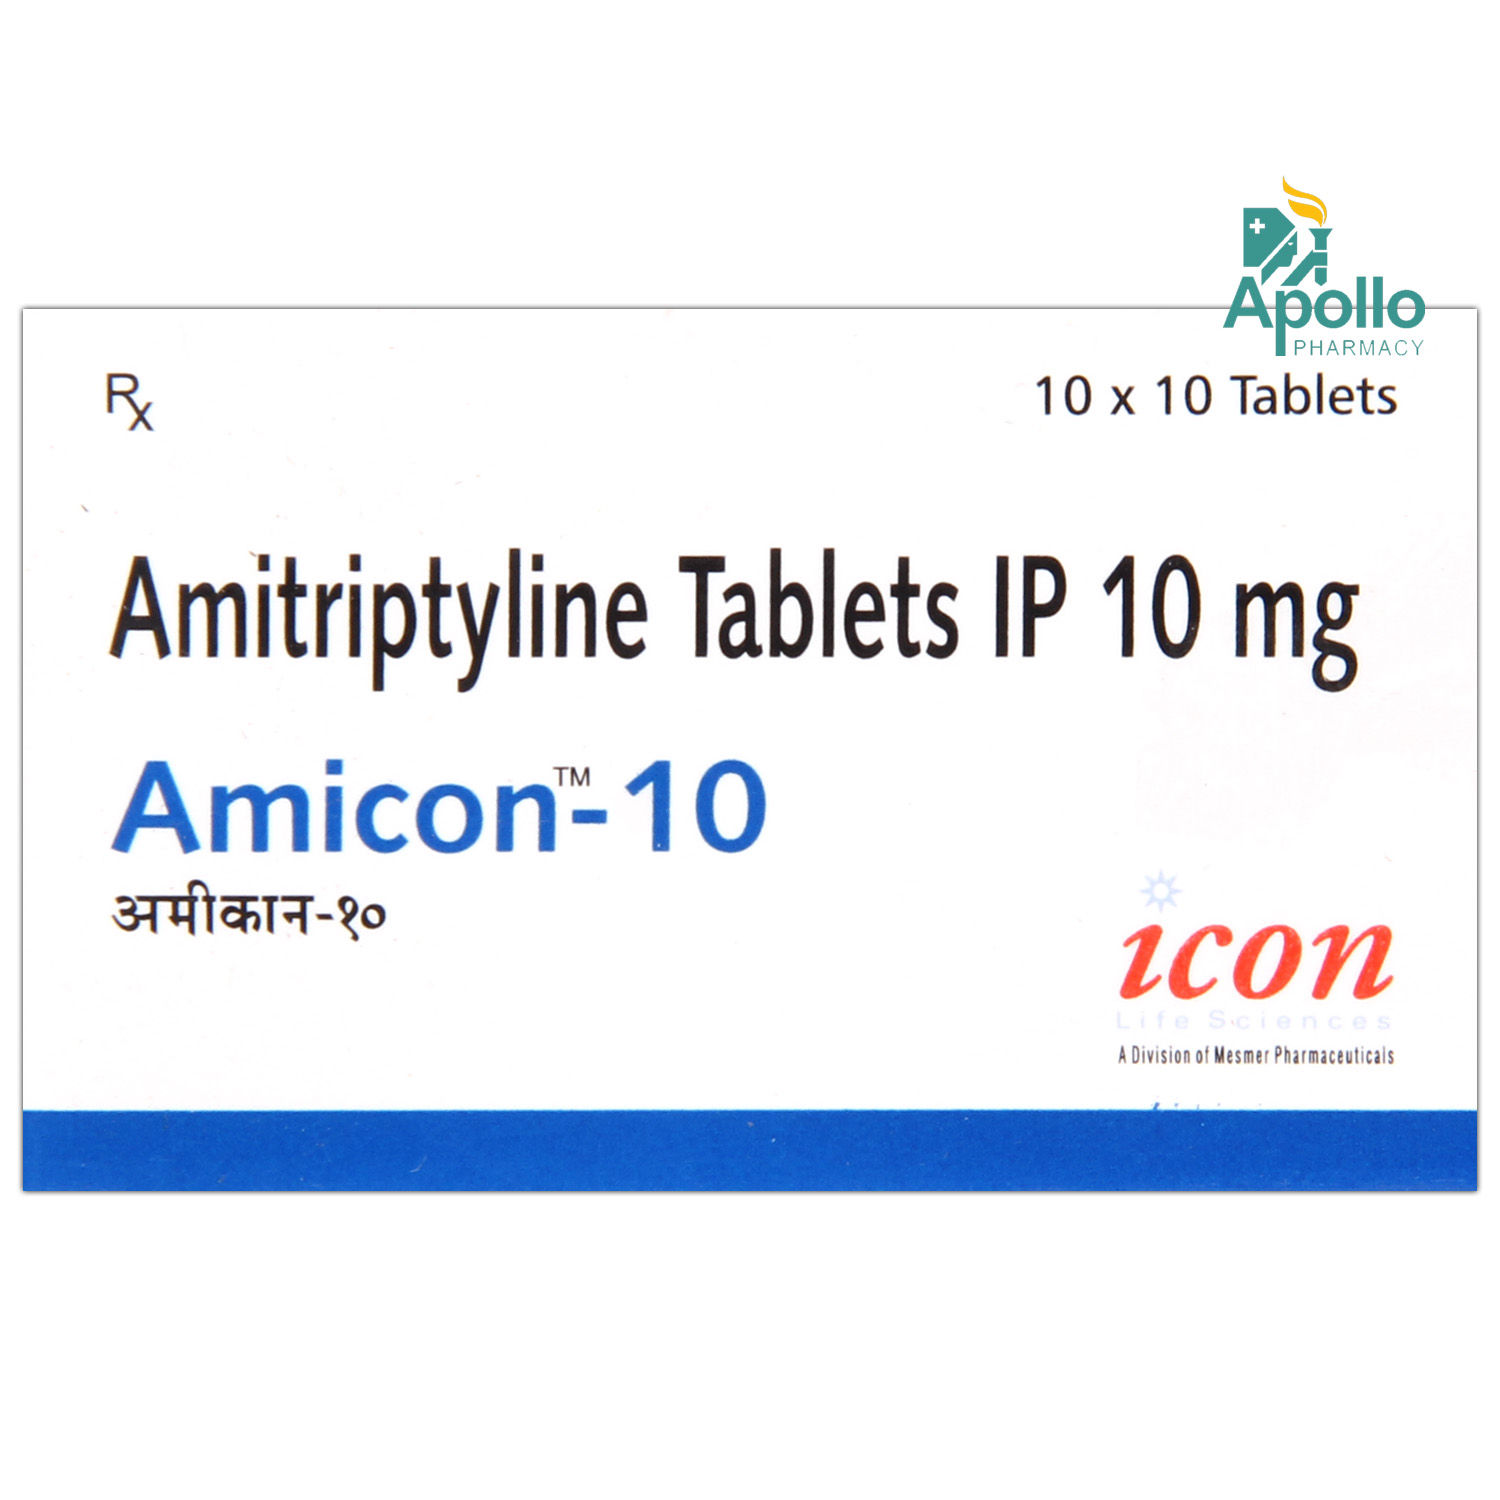 Amicon 10 Tablet 10's, Pack of 10 TABLETS